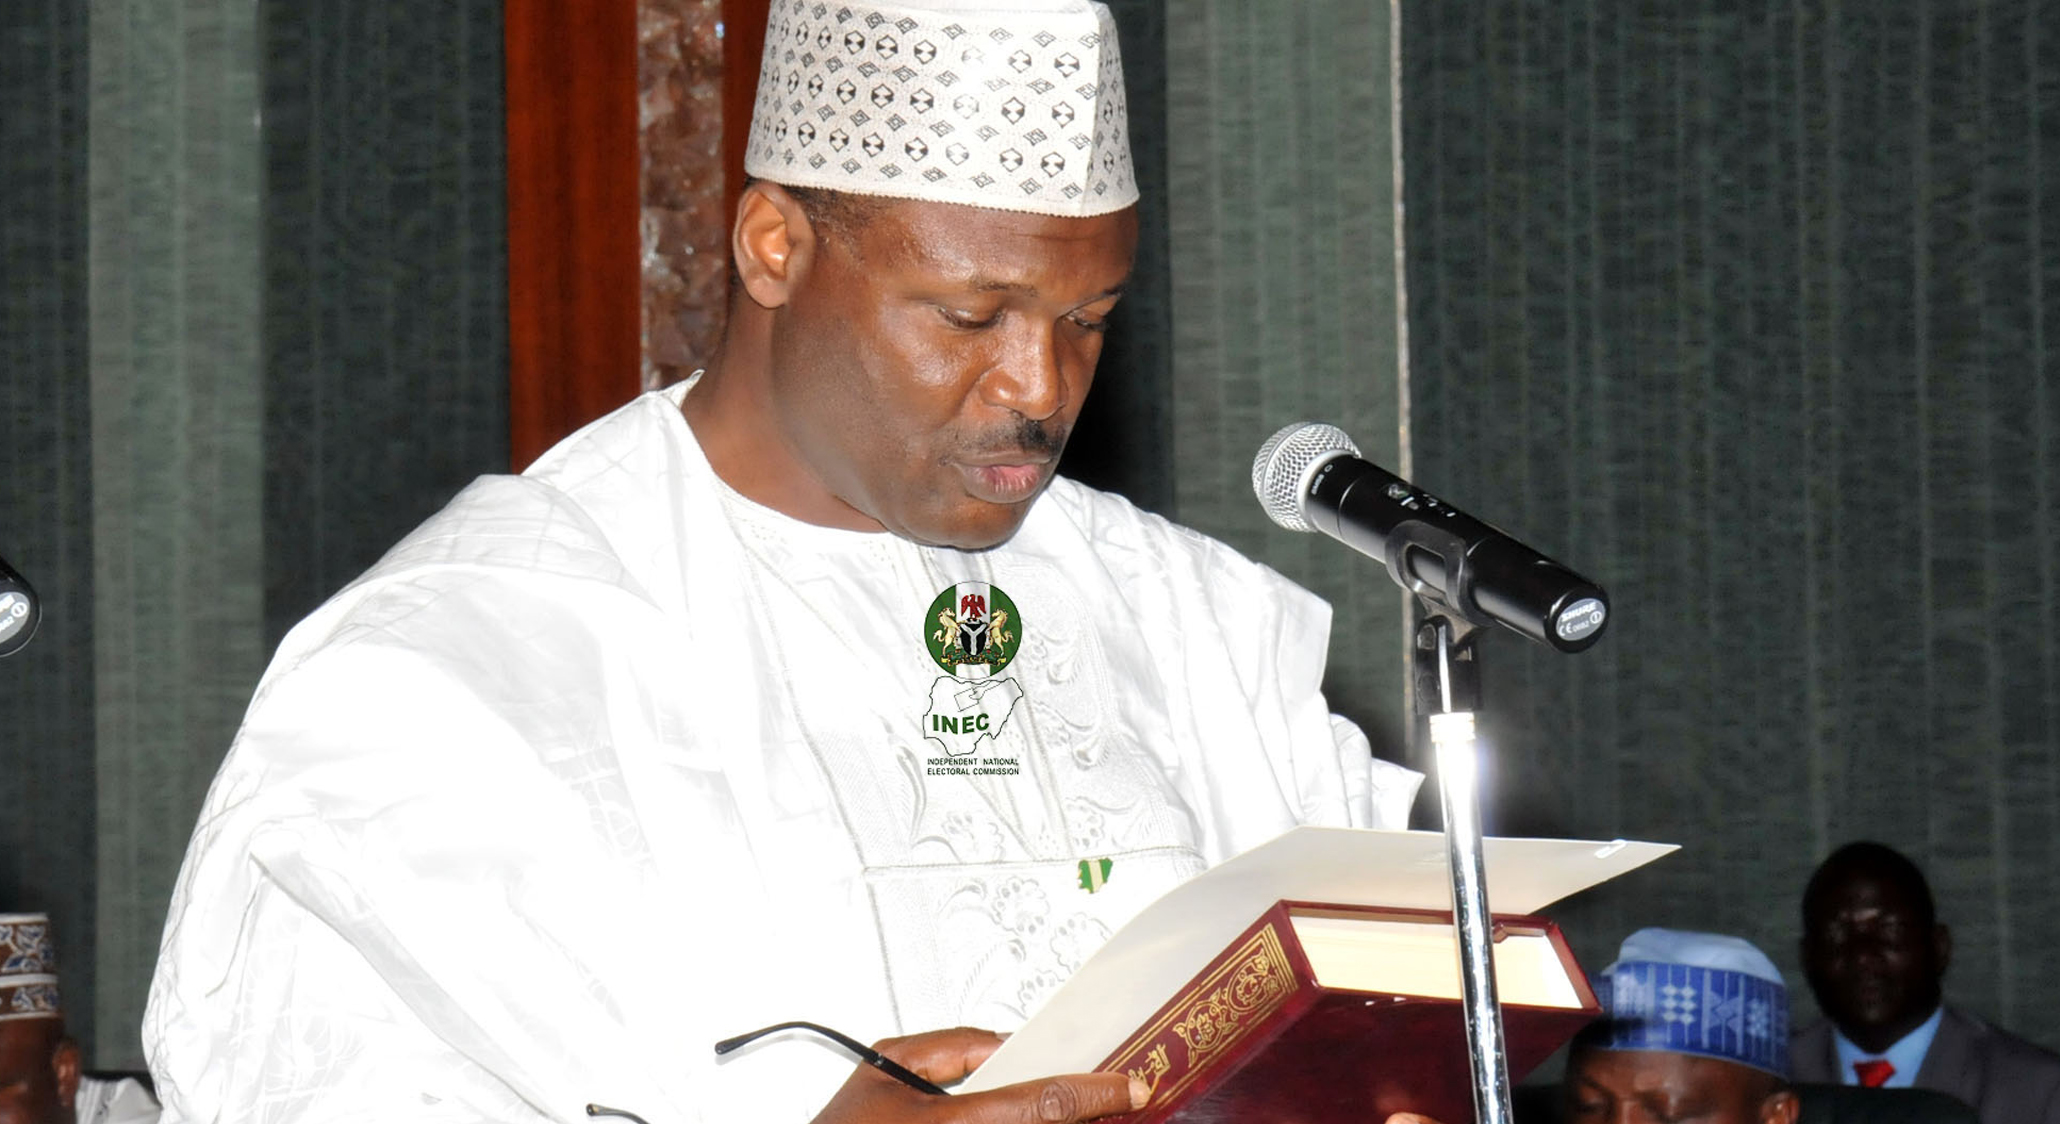 INEC: Senate Confirm Prof. Yakubu As Chair For Second Term